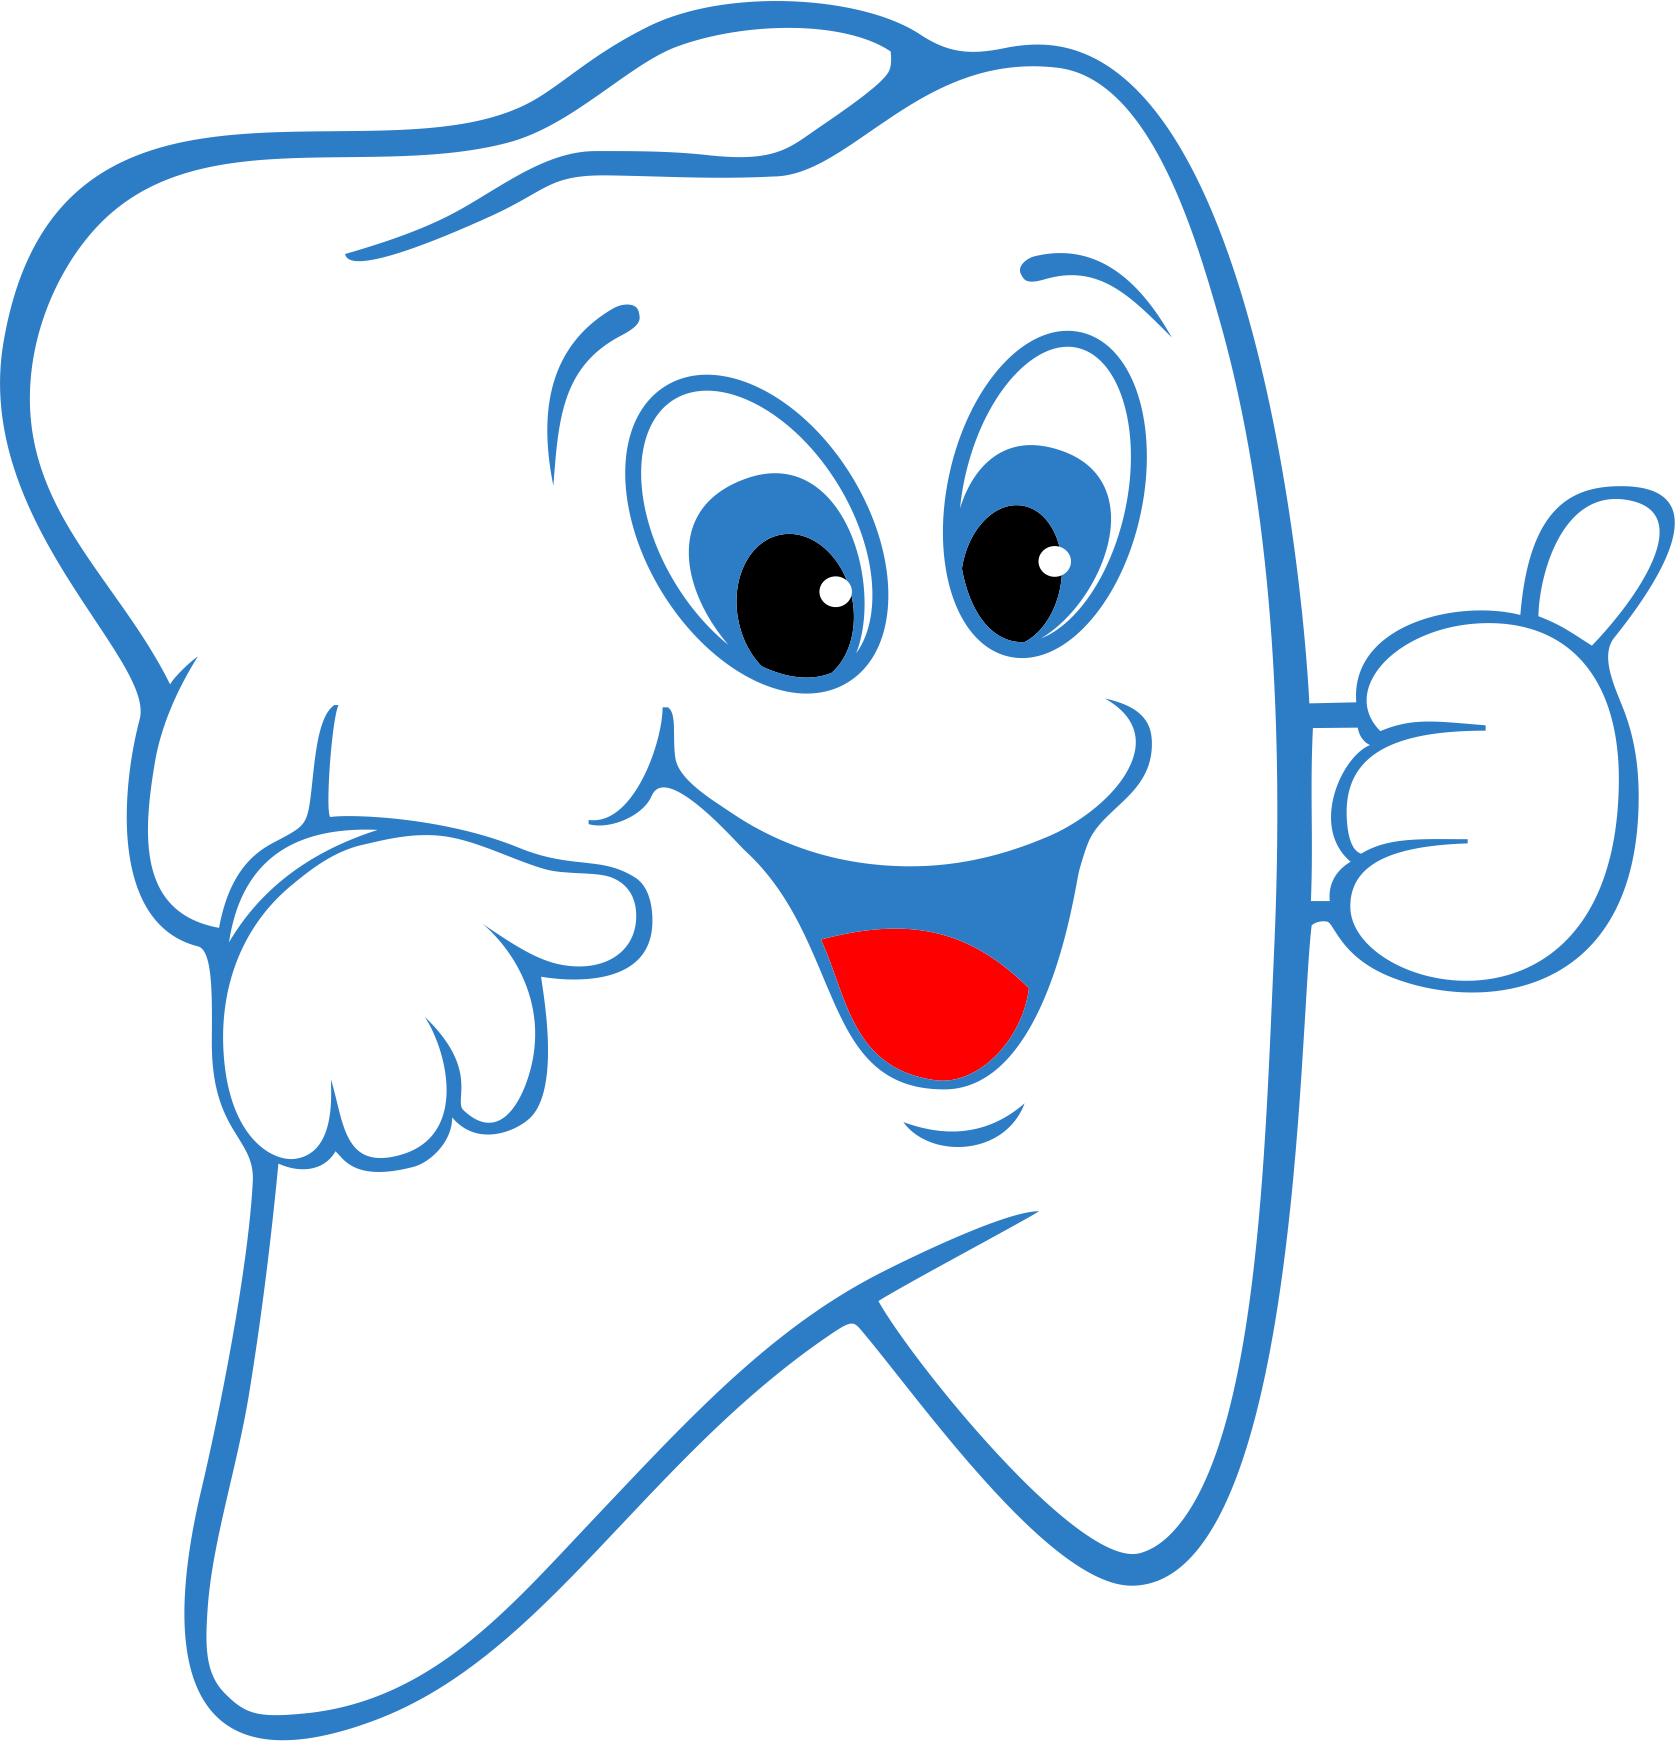 Toothfairy on tooth fairy clip art and dental image image